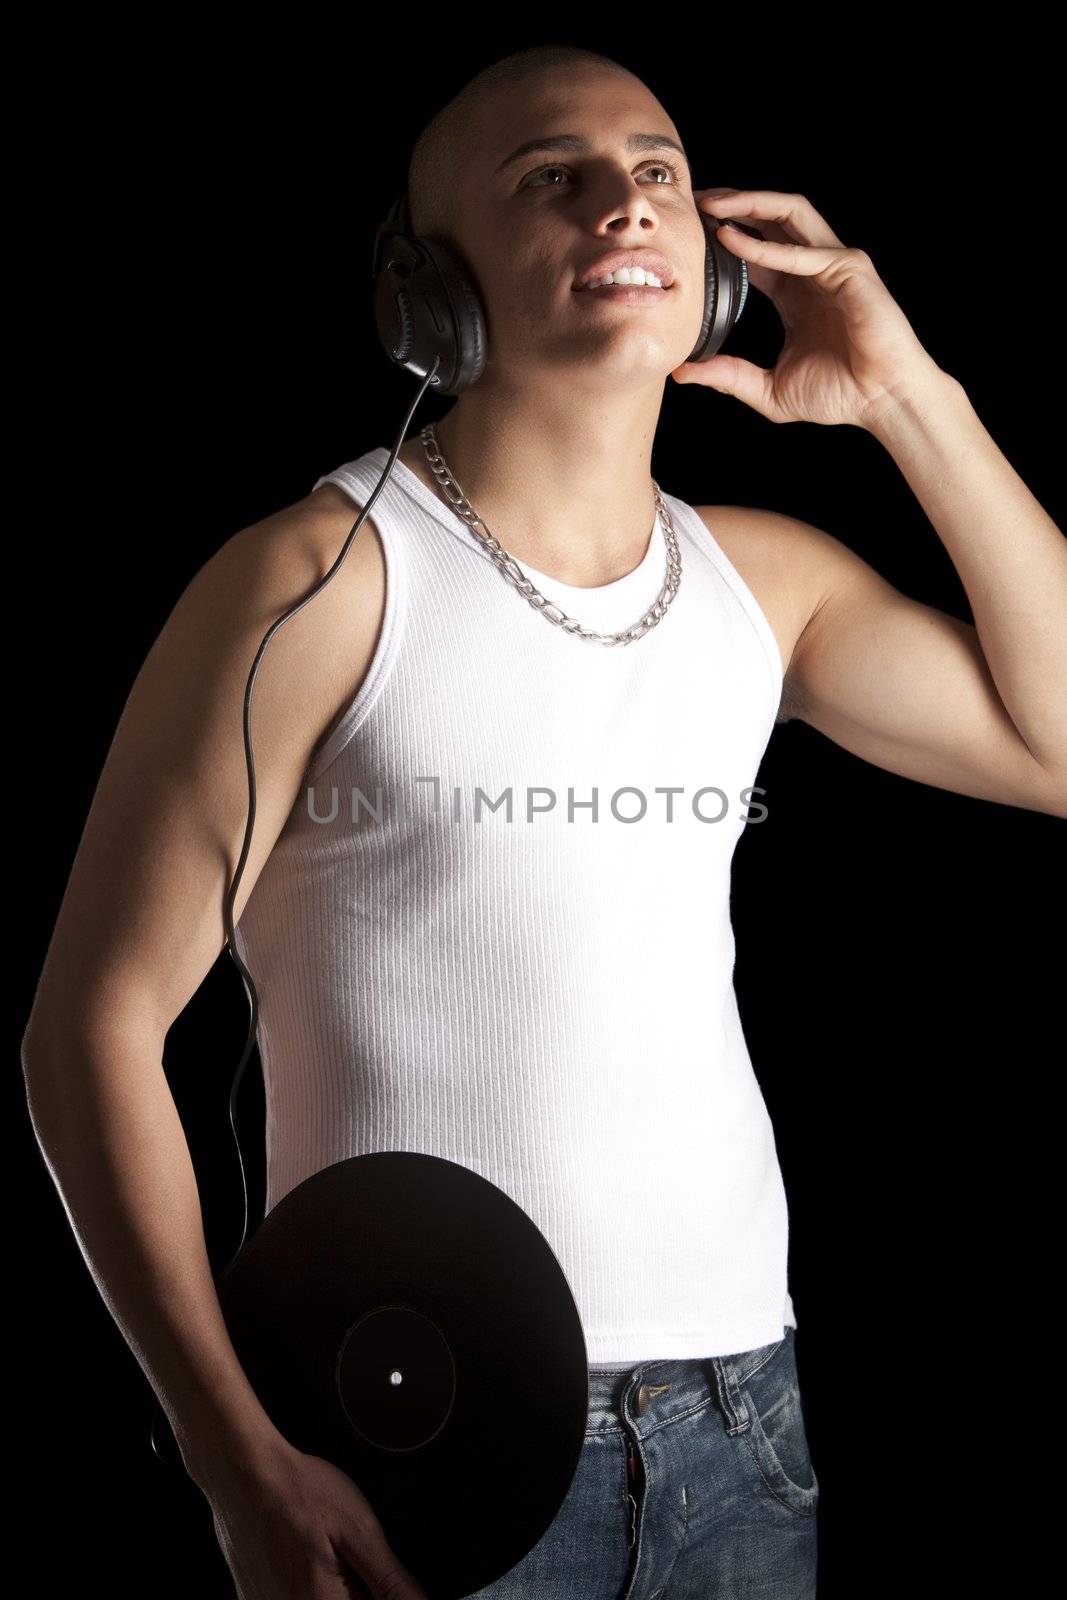 A good looking, muscular built, man on a black background with earphones.